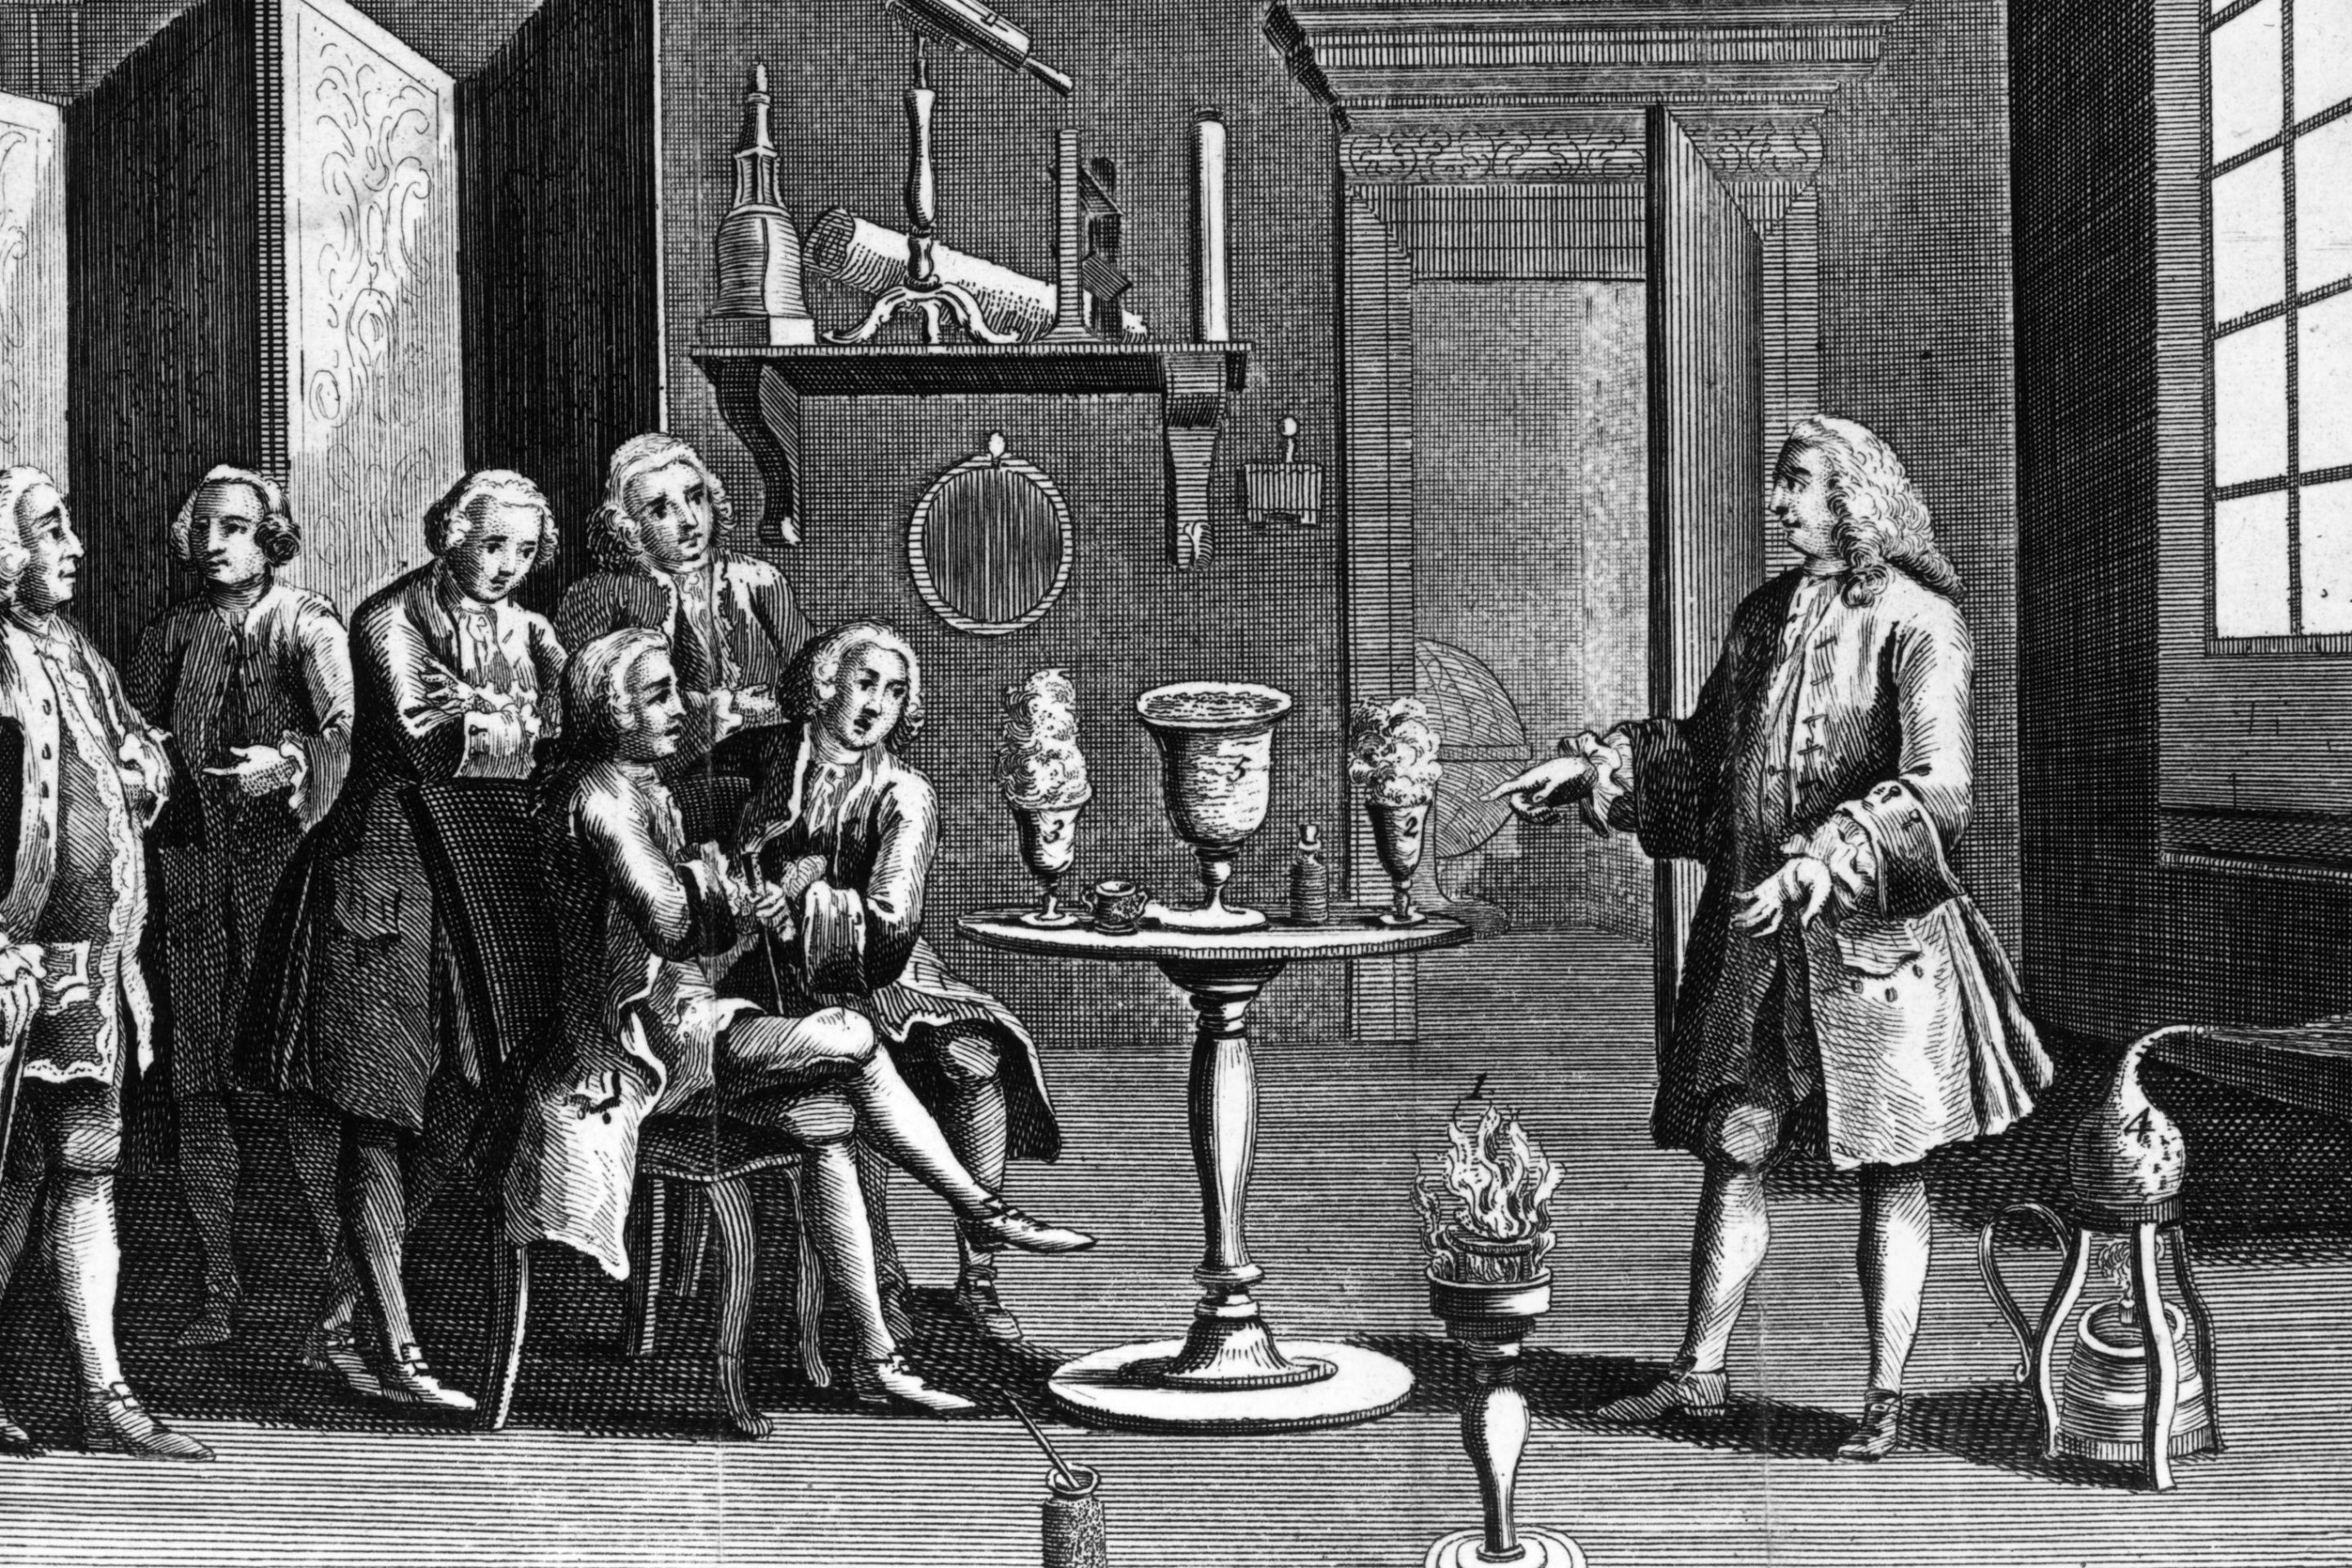 1748, A scientist demonstrates an electrical experiment at a meeting of a scientific society in London. (Photo by MPI/Getty Images)